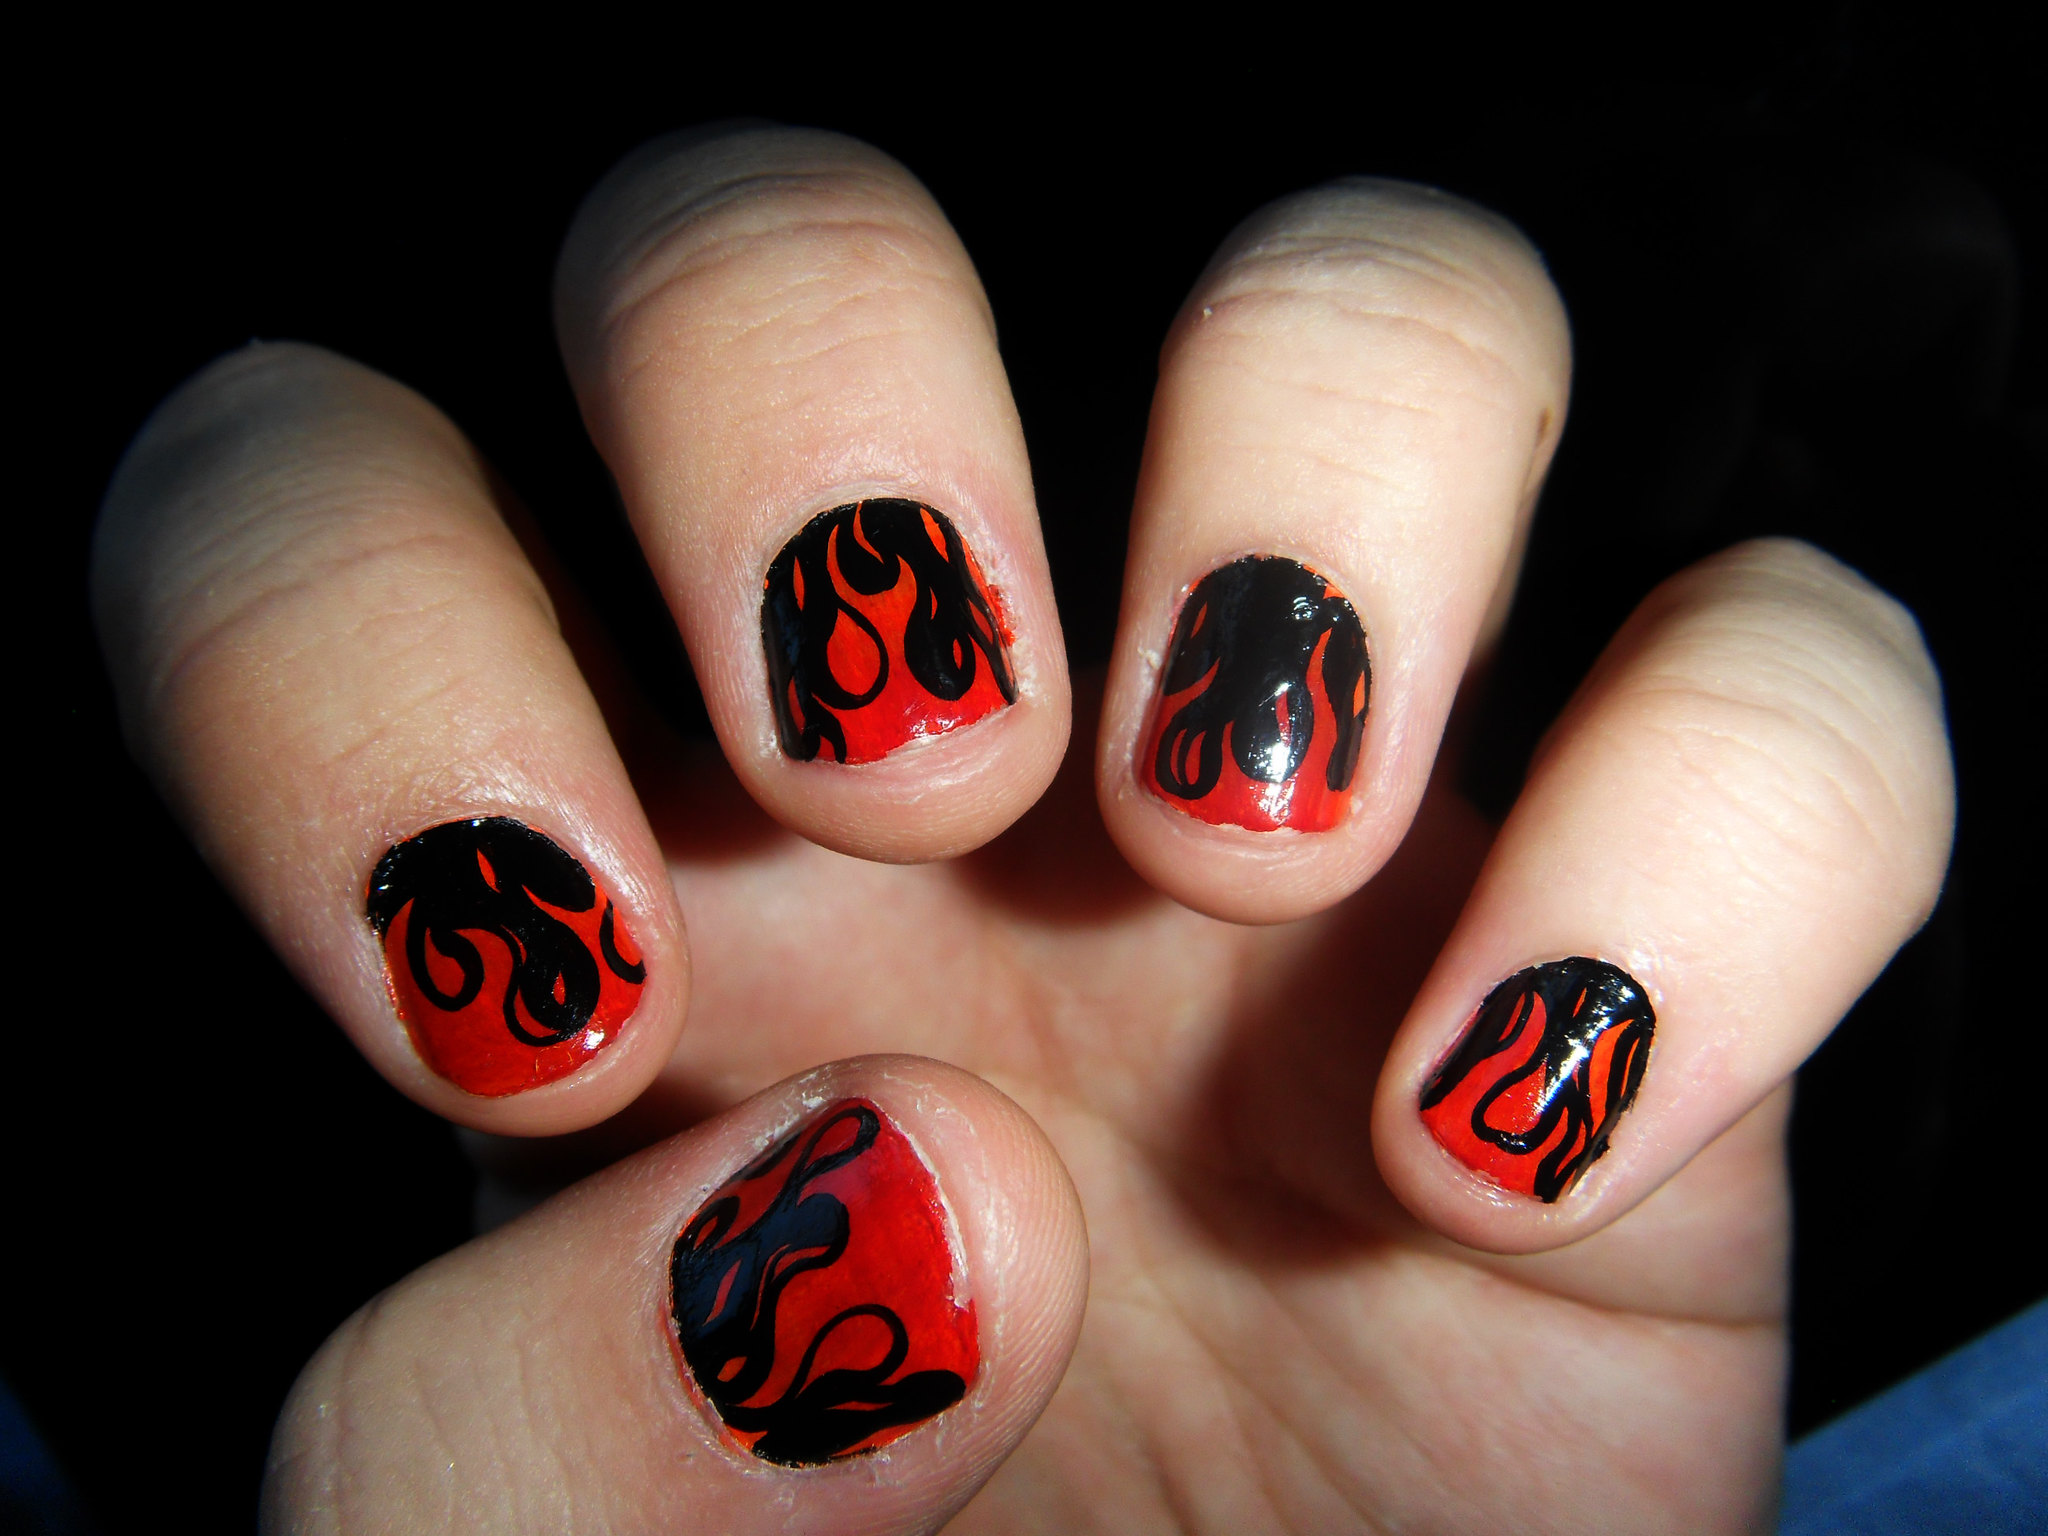 Flame nail art by Neil Milne on Flickr